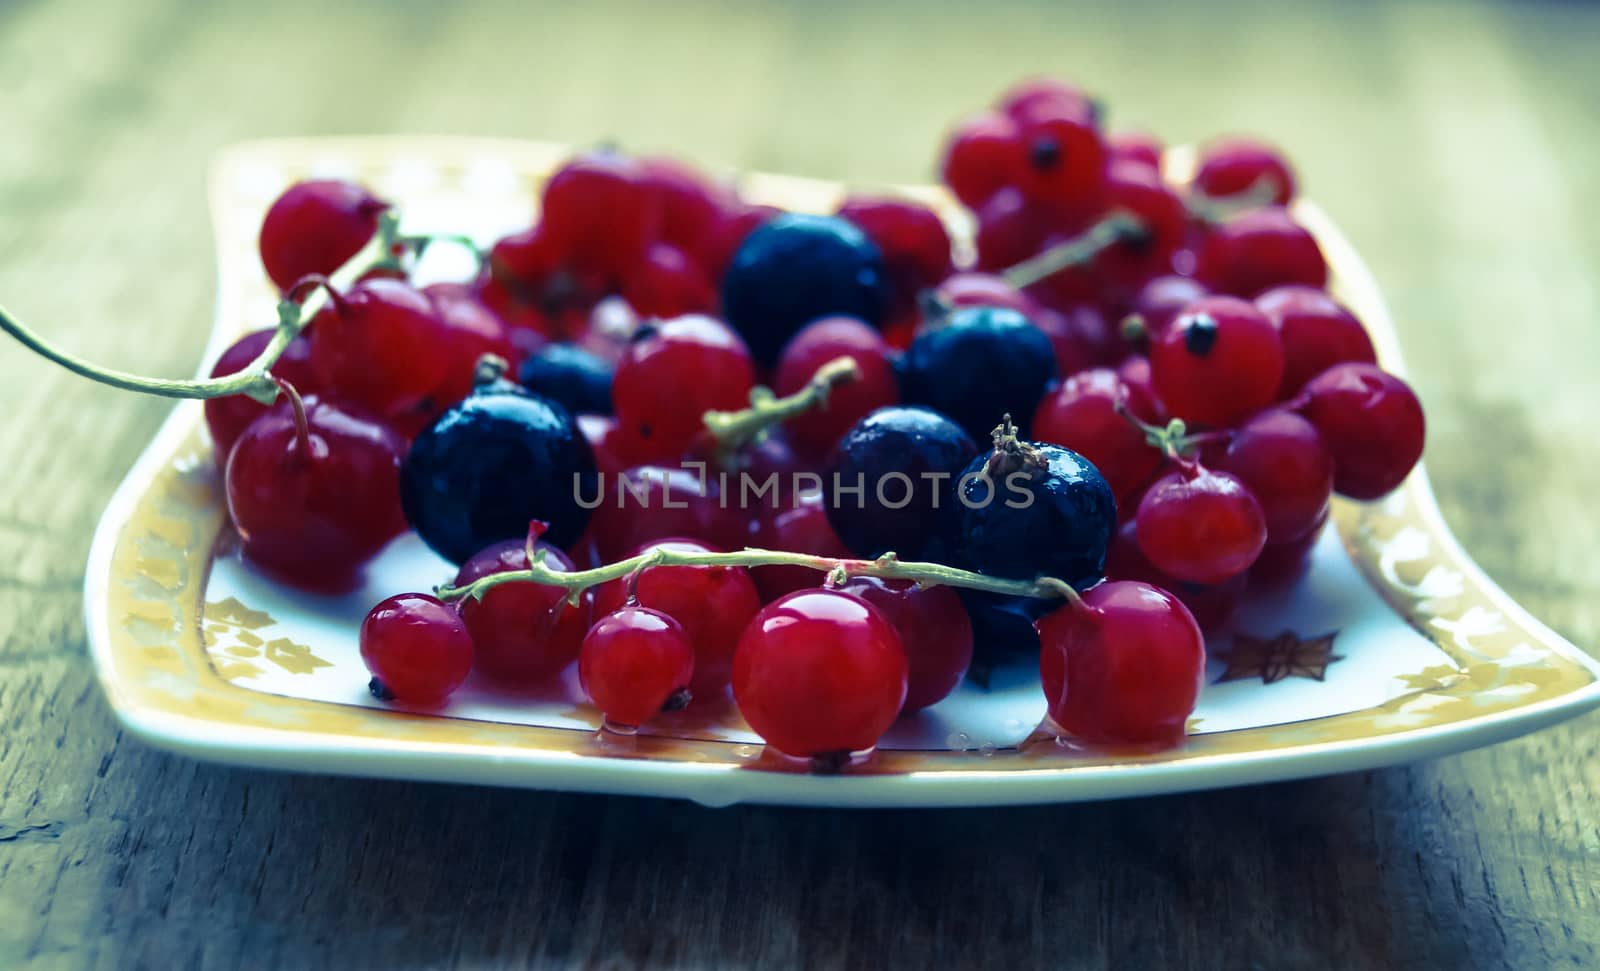 currant berries on a plate photo effect by Oleczka11